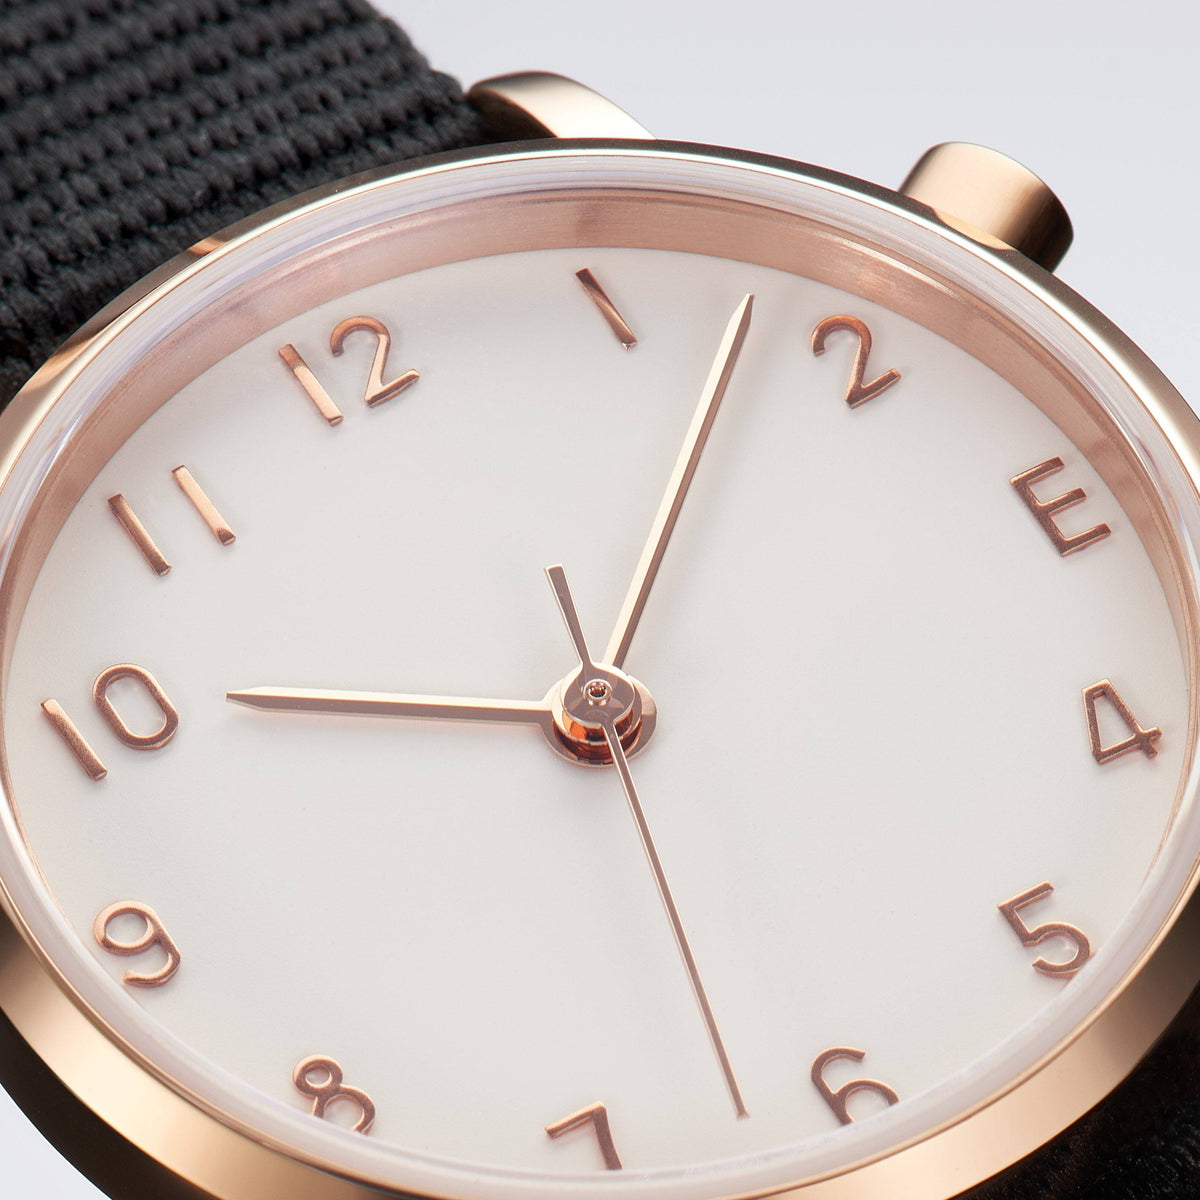 The White and Rose Gold Watch - Triangles (Kids)